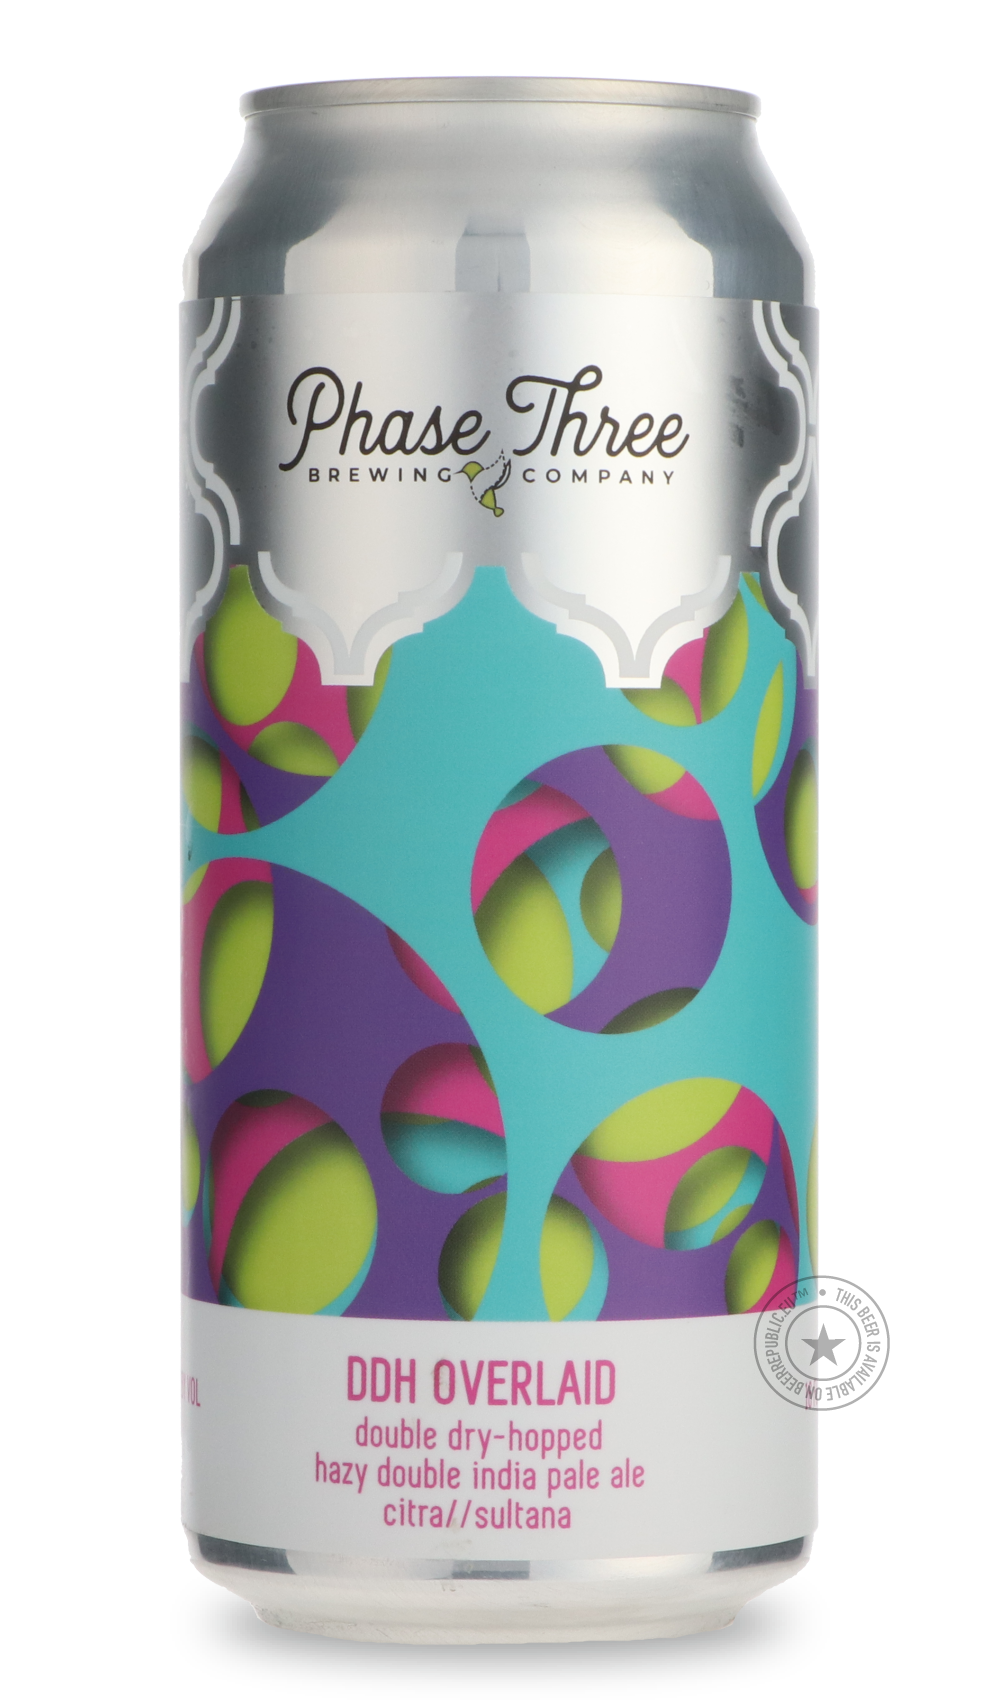 -Phase Three- DDH Overlaid-IPA- Only @ Beer Republic - The best online beer store for American & Canadian craft beer - Buy beer online from the USA and Canada - Bier online kopen - Amerikaans bier kopen - Craft beer store - Craft beer kopen - Amerikanisch bier kaufen - Bier online kaufen - Acheter biere online - IPA - Stout - Porter - New England IPA - Hazy IPA - Imperial Stout - Barrel Aged - Barrel Aged Imperial Stout - Brown - Dark beer - Blond - Blonde - Pilsner - Lager - Wheat - Weizen - Amber - Barley